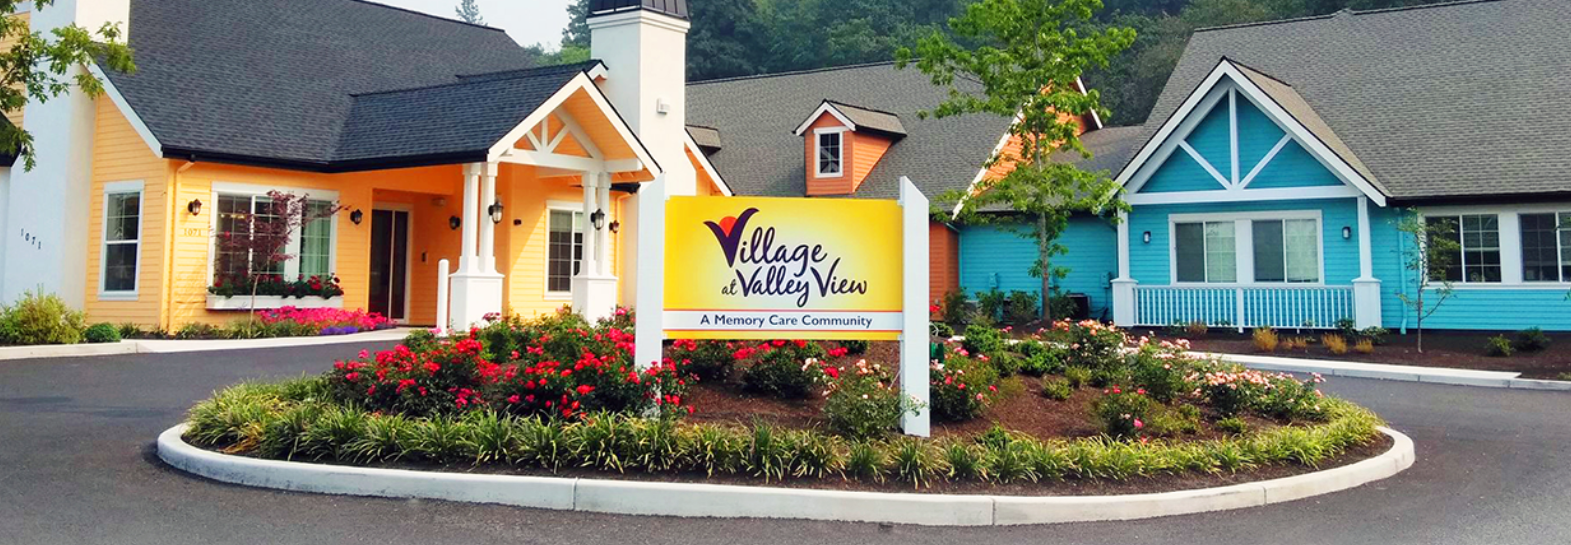 Village at Valley View